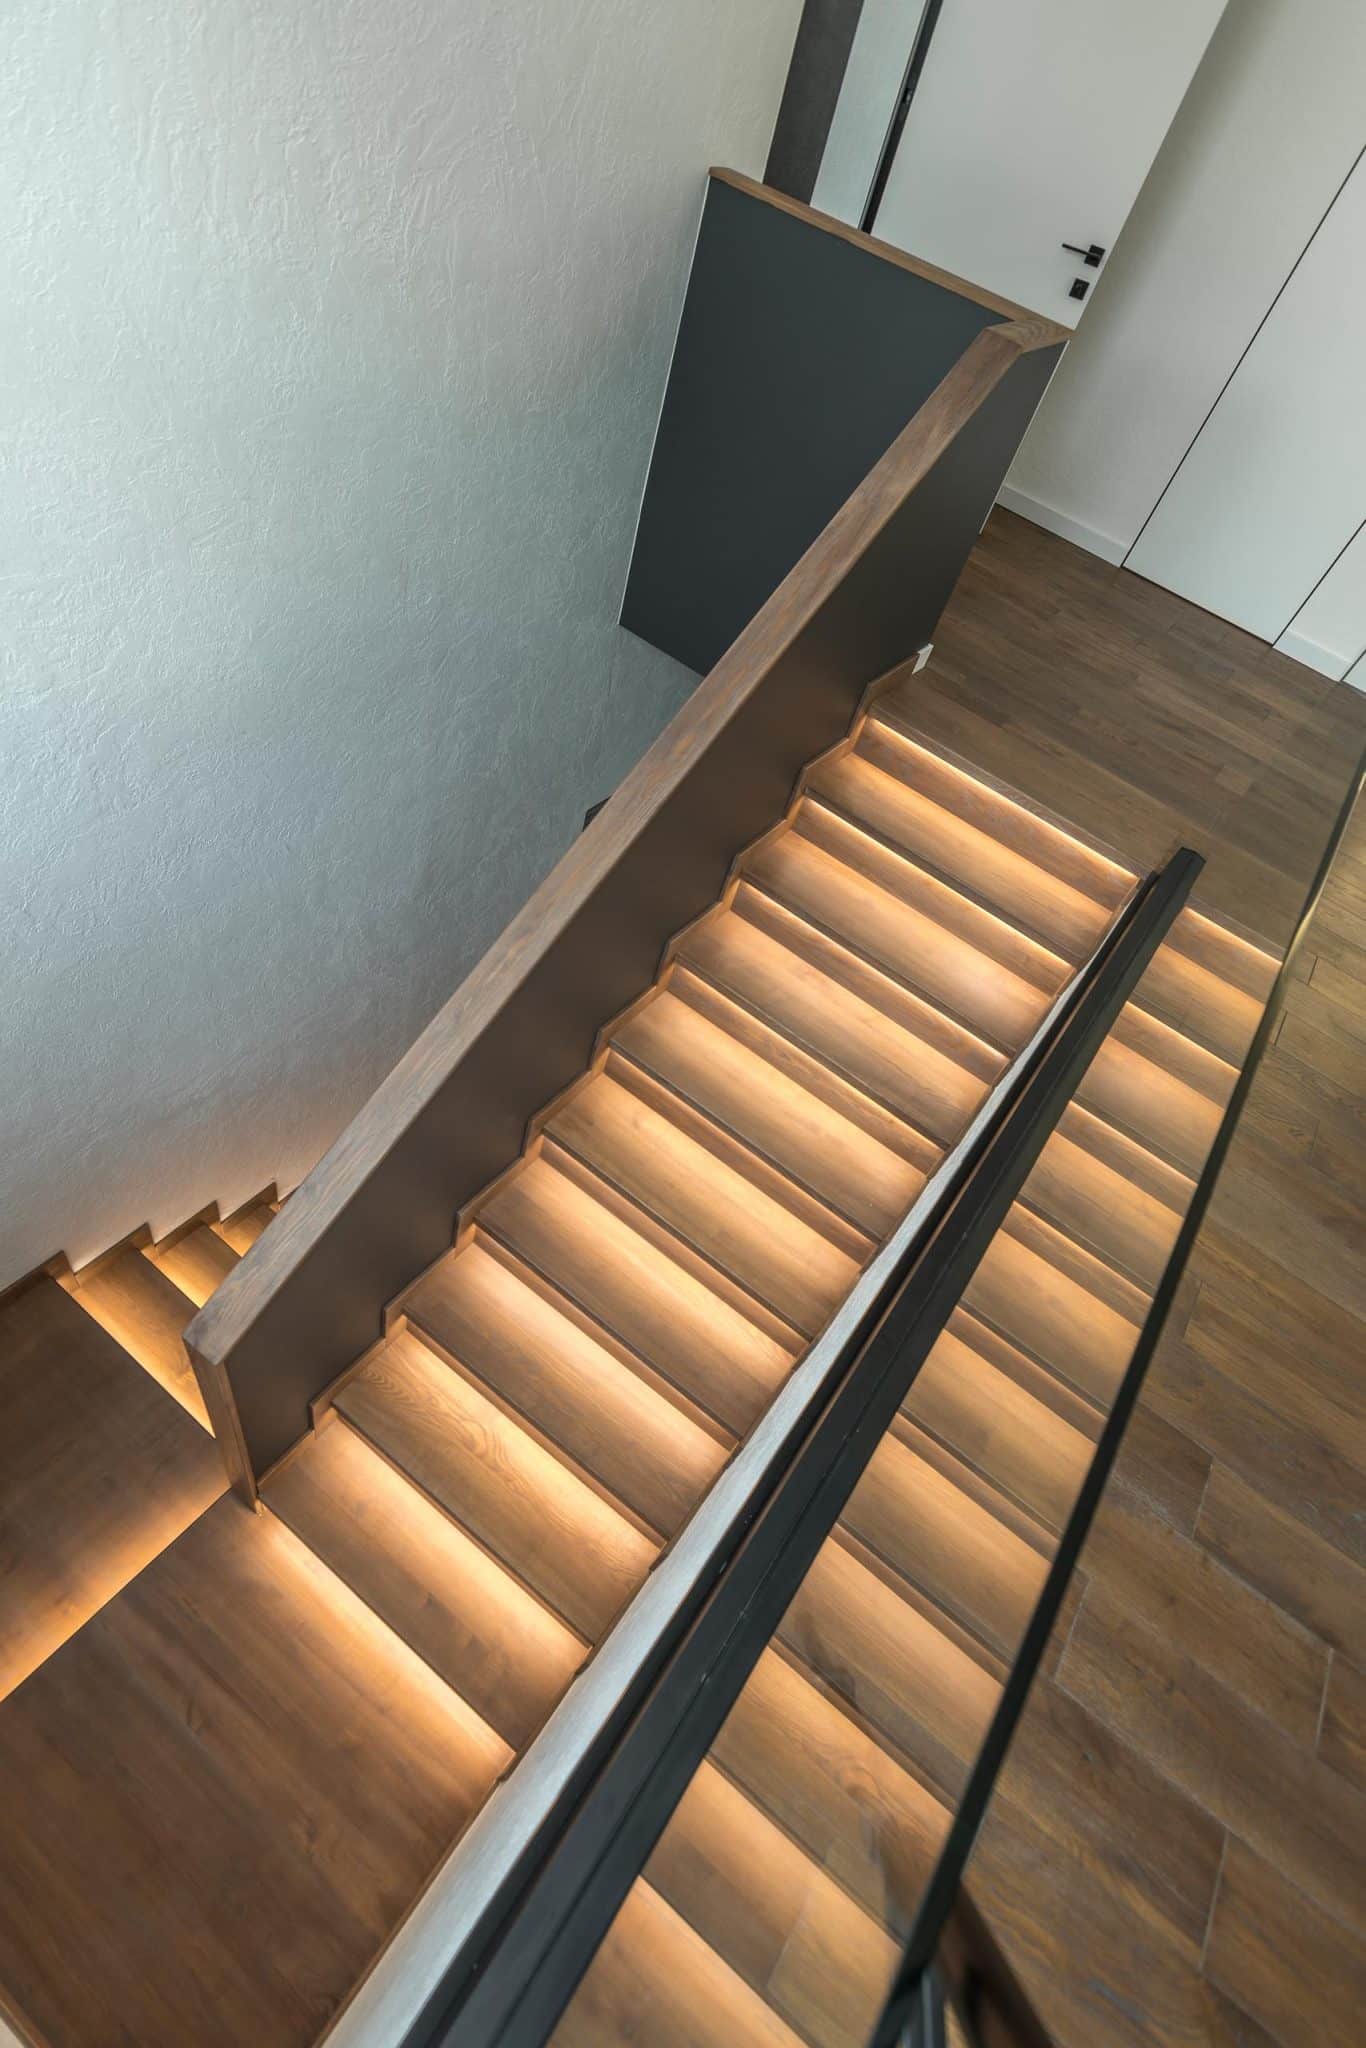 Led Strip Under The Stairs Of This Home Adds A Warm Glow To The Interior